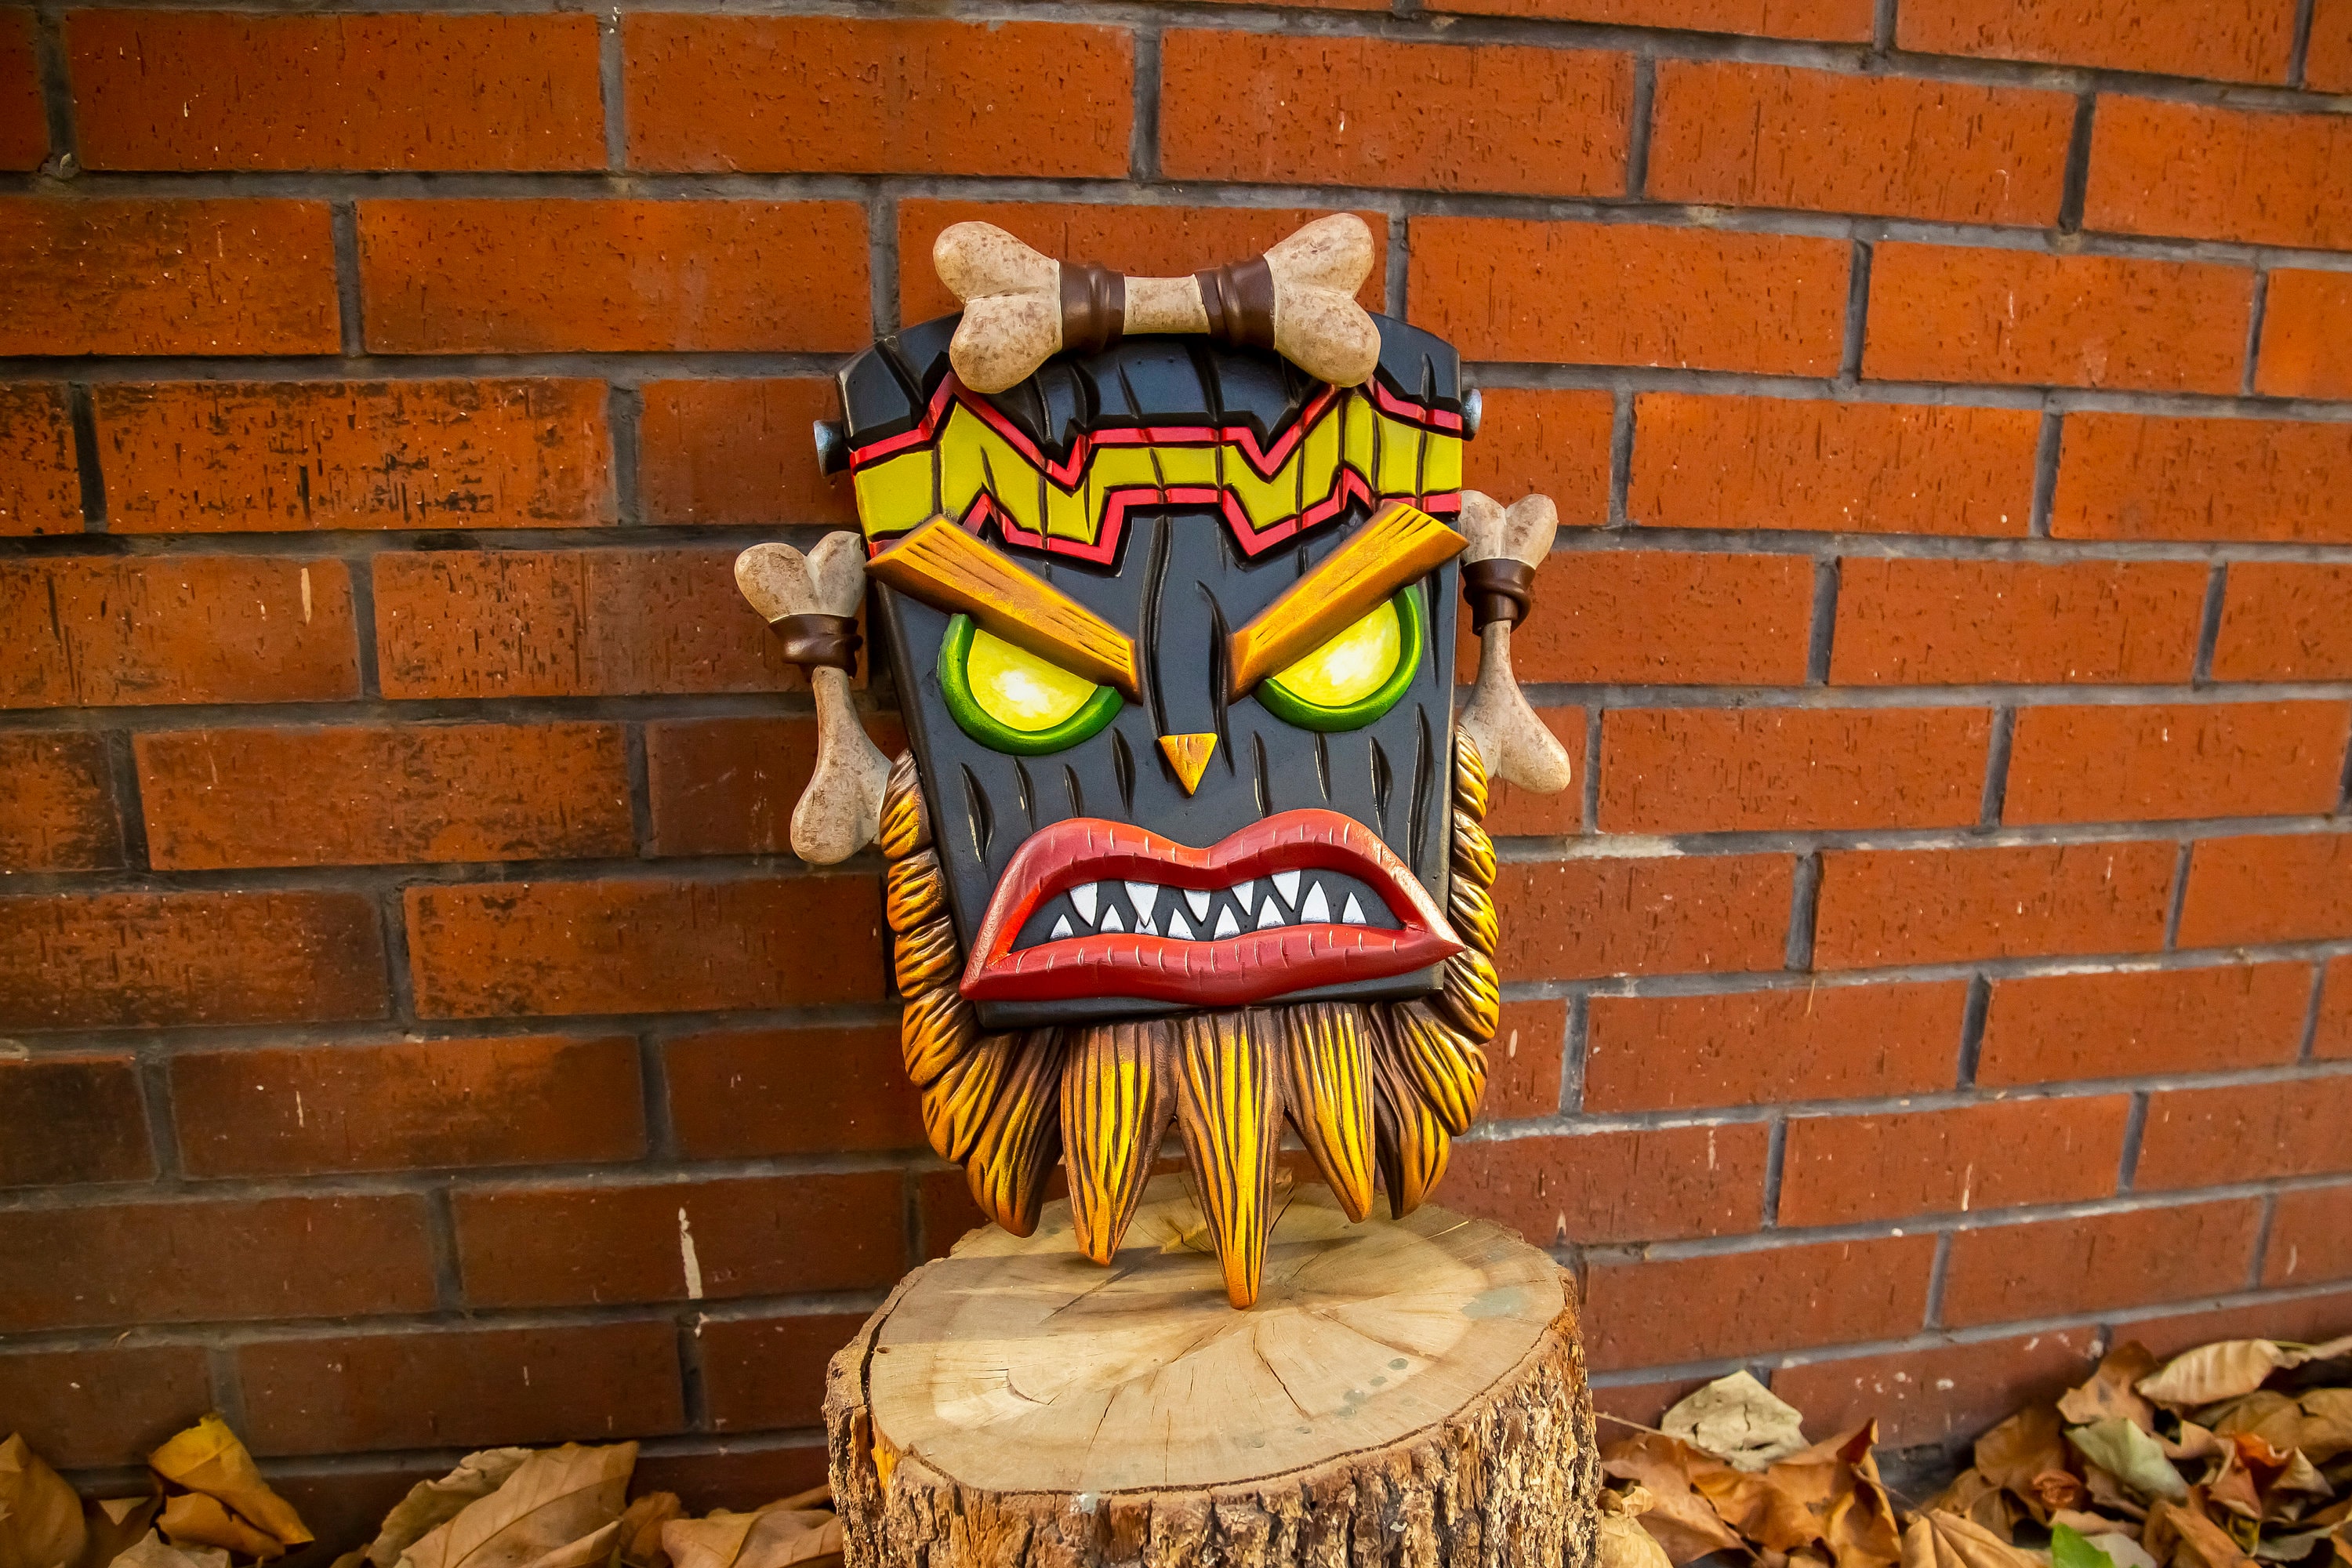 Omhyggelig læsning Hotellet tro PS1 Uka Uka Inspired Unoffical Mask Replica - Etsy